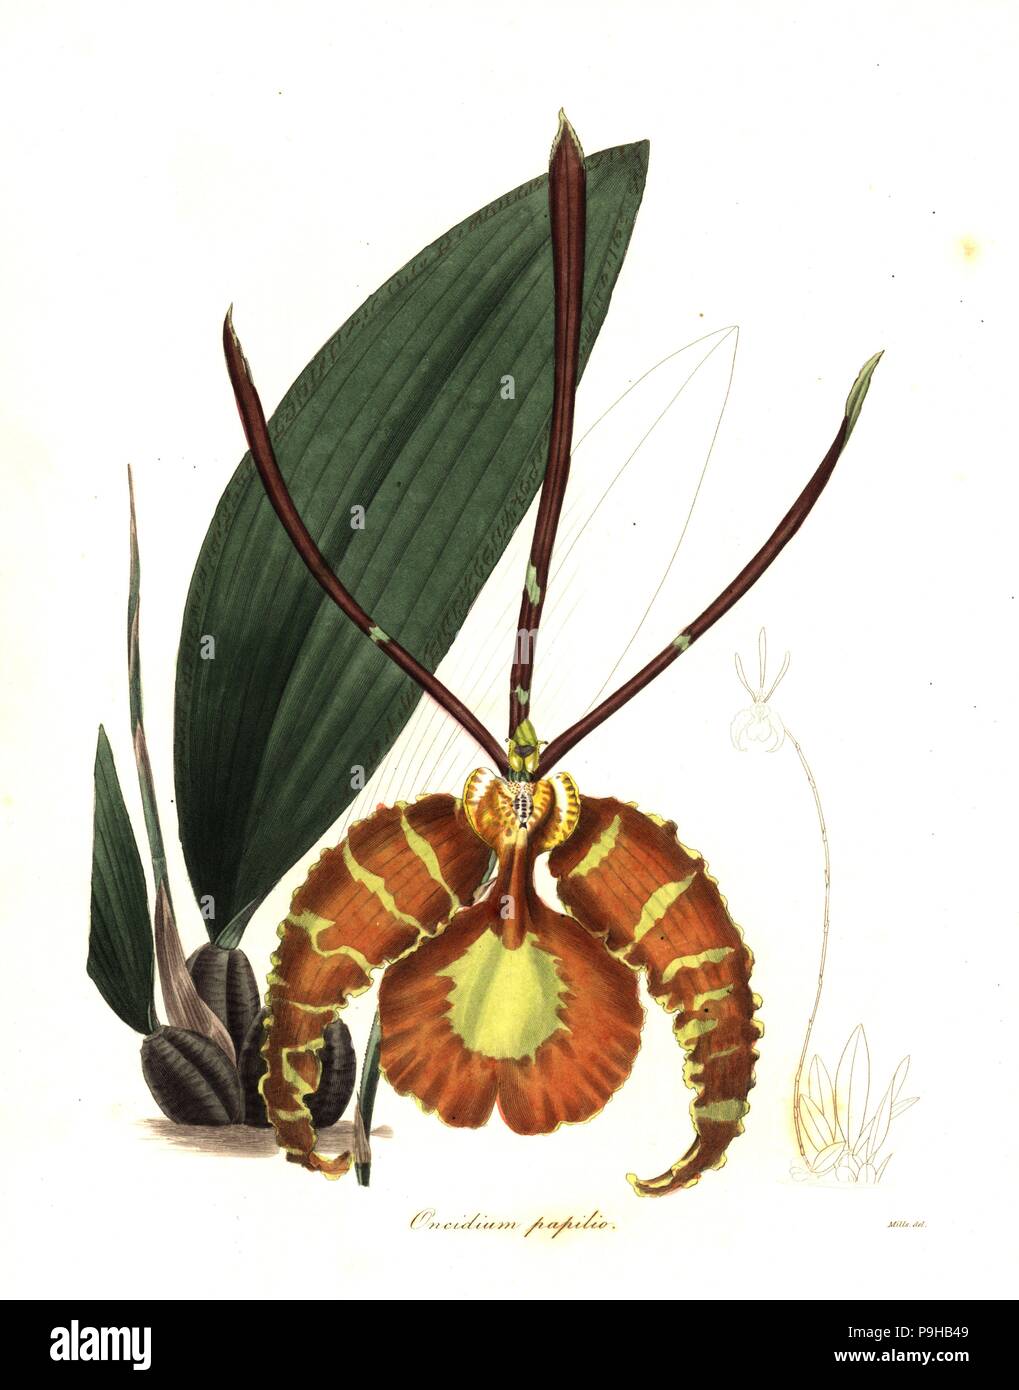 Butterfly orchid, Psychopsis papilio (Butterfly oncidium, Oncidium papilio). Handcoloured copperplate engraving by Watts after a botanical illustration by Mills from Benjamin Maund and the Rev. John Stevens Henslow's The Botanist, London, 1836. Stock Photo